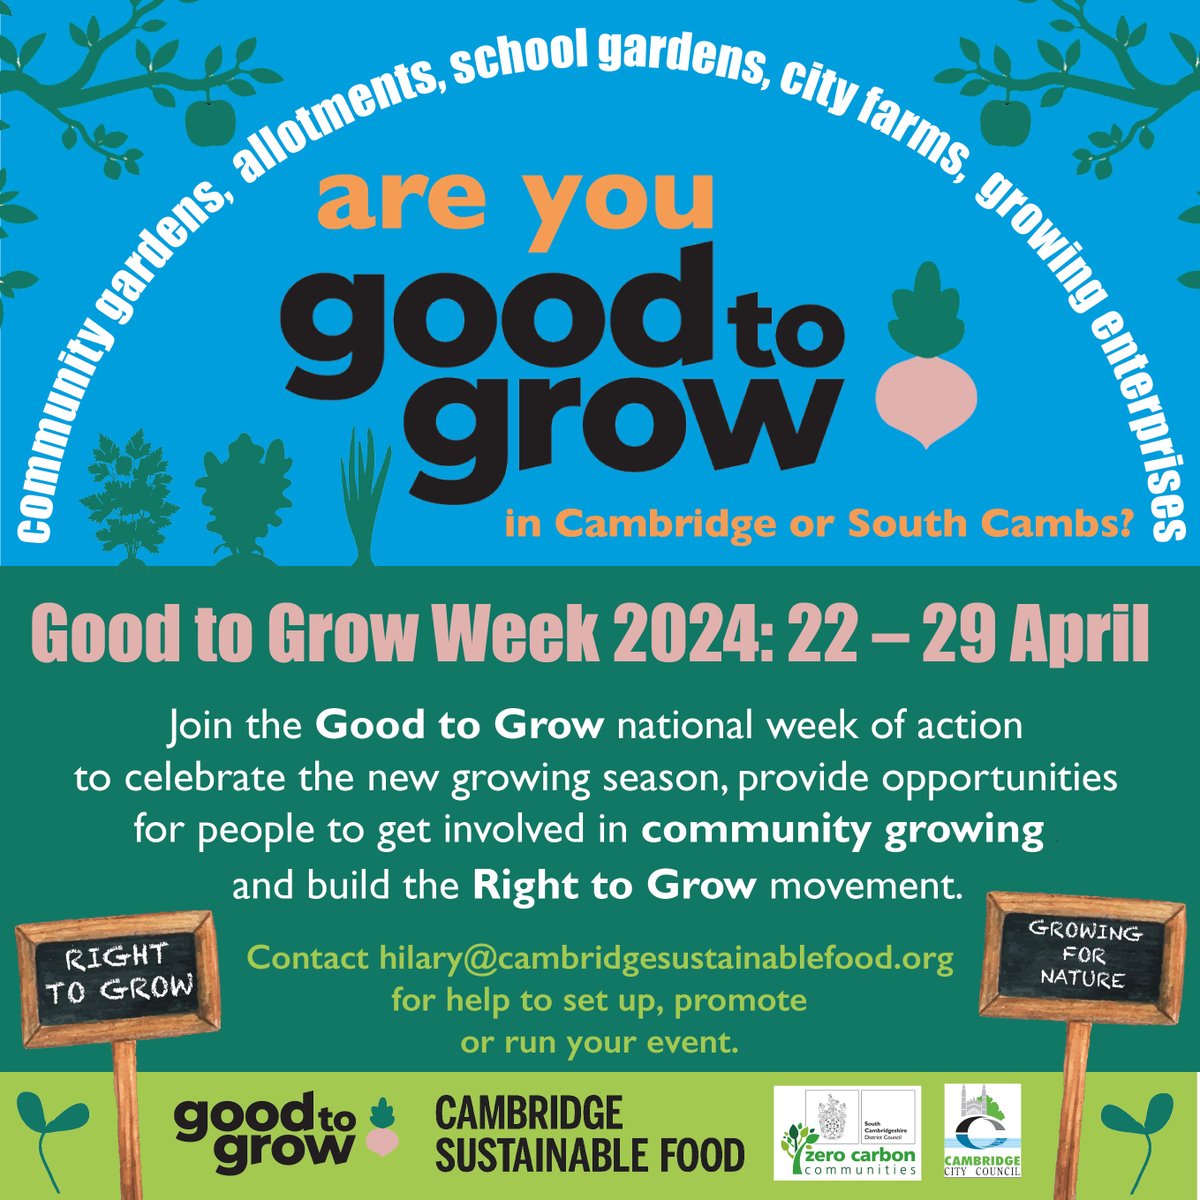 We are super-excited to be working with Community Artist @HilCoxCondron to create, demonstrate and make a noise about all the great growing projects in Cambridge and South Cambs. Find out more here: goodtogrowuk.org/good_to_grow_d… #GoodToGrow #GrowYourOwn